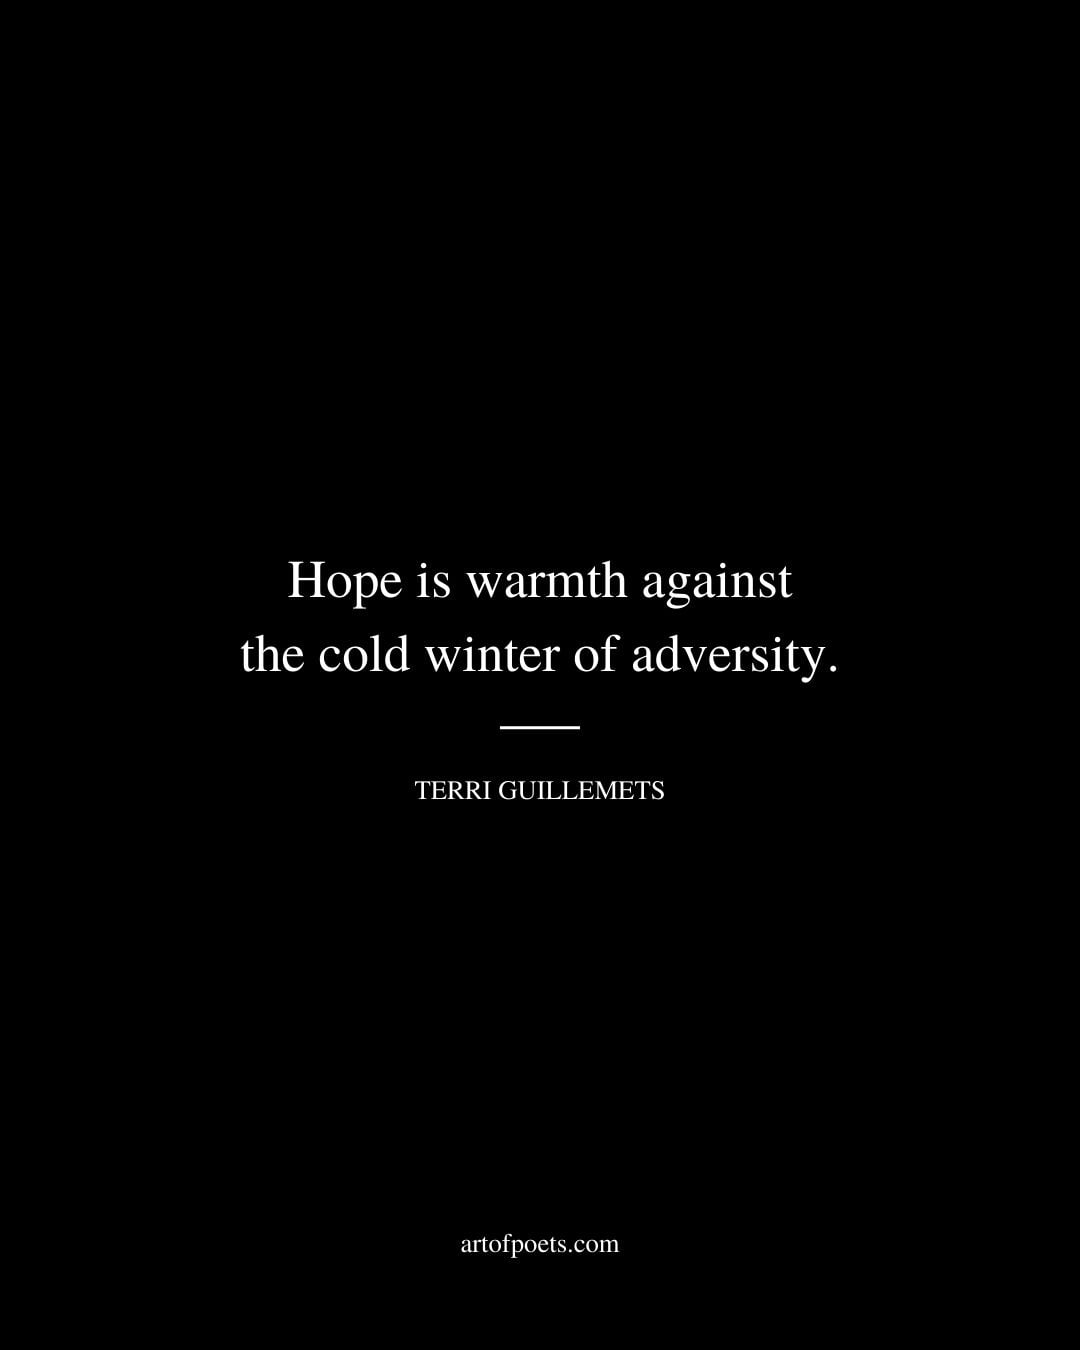 Hope is warmth against the cold winter of adversity. Terri Guillemets